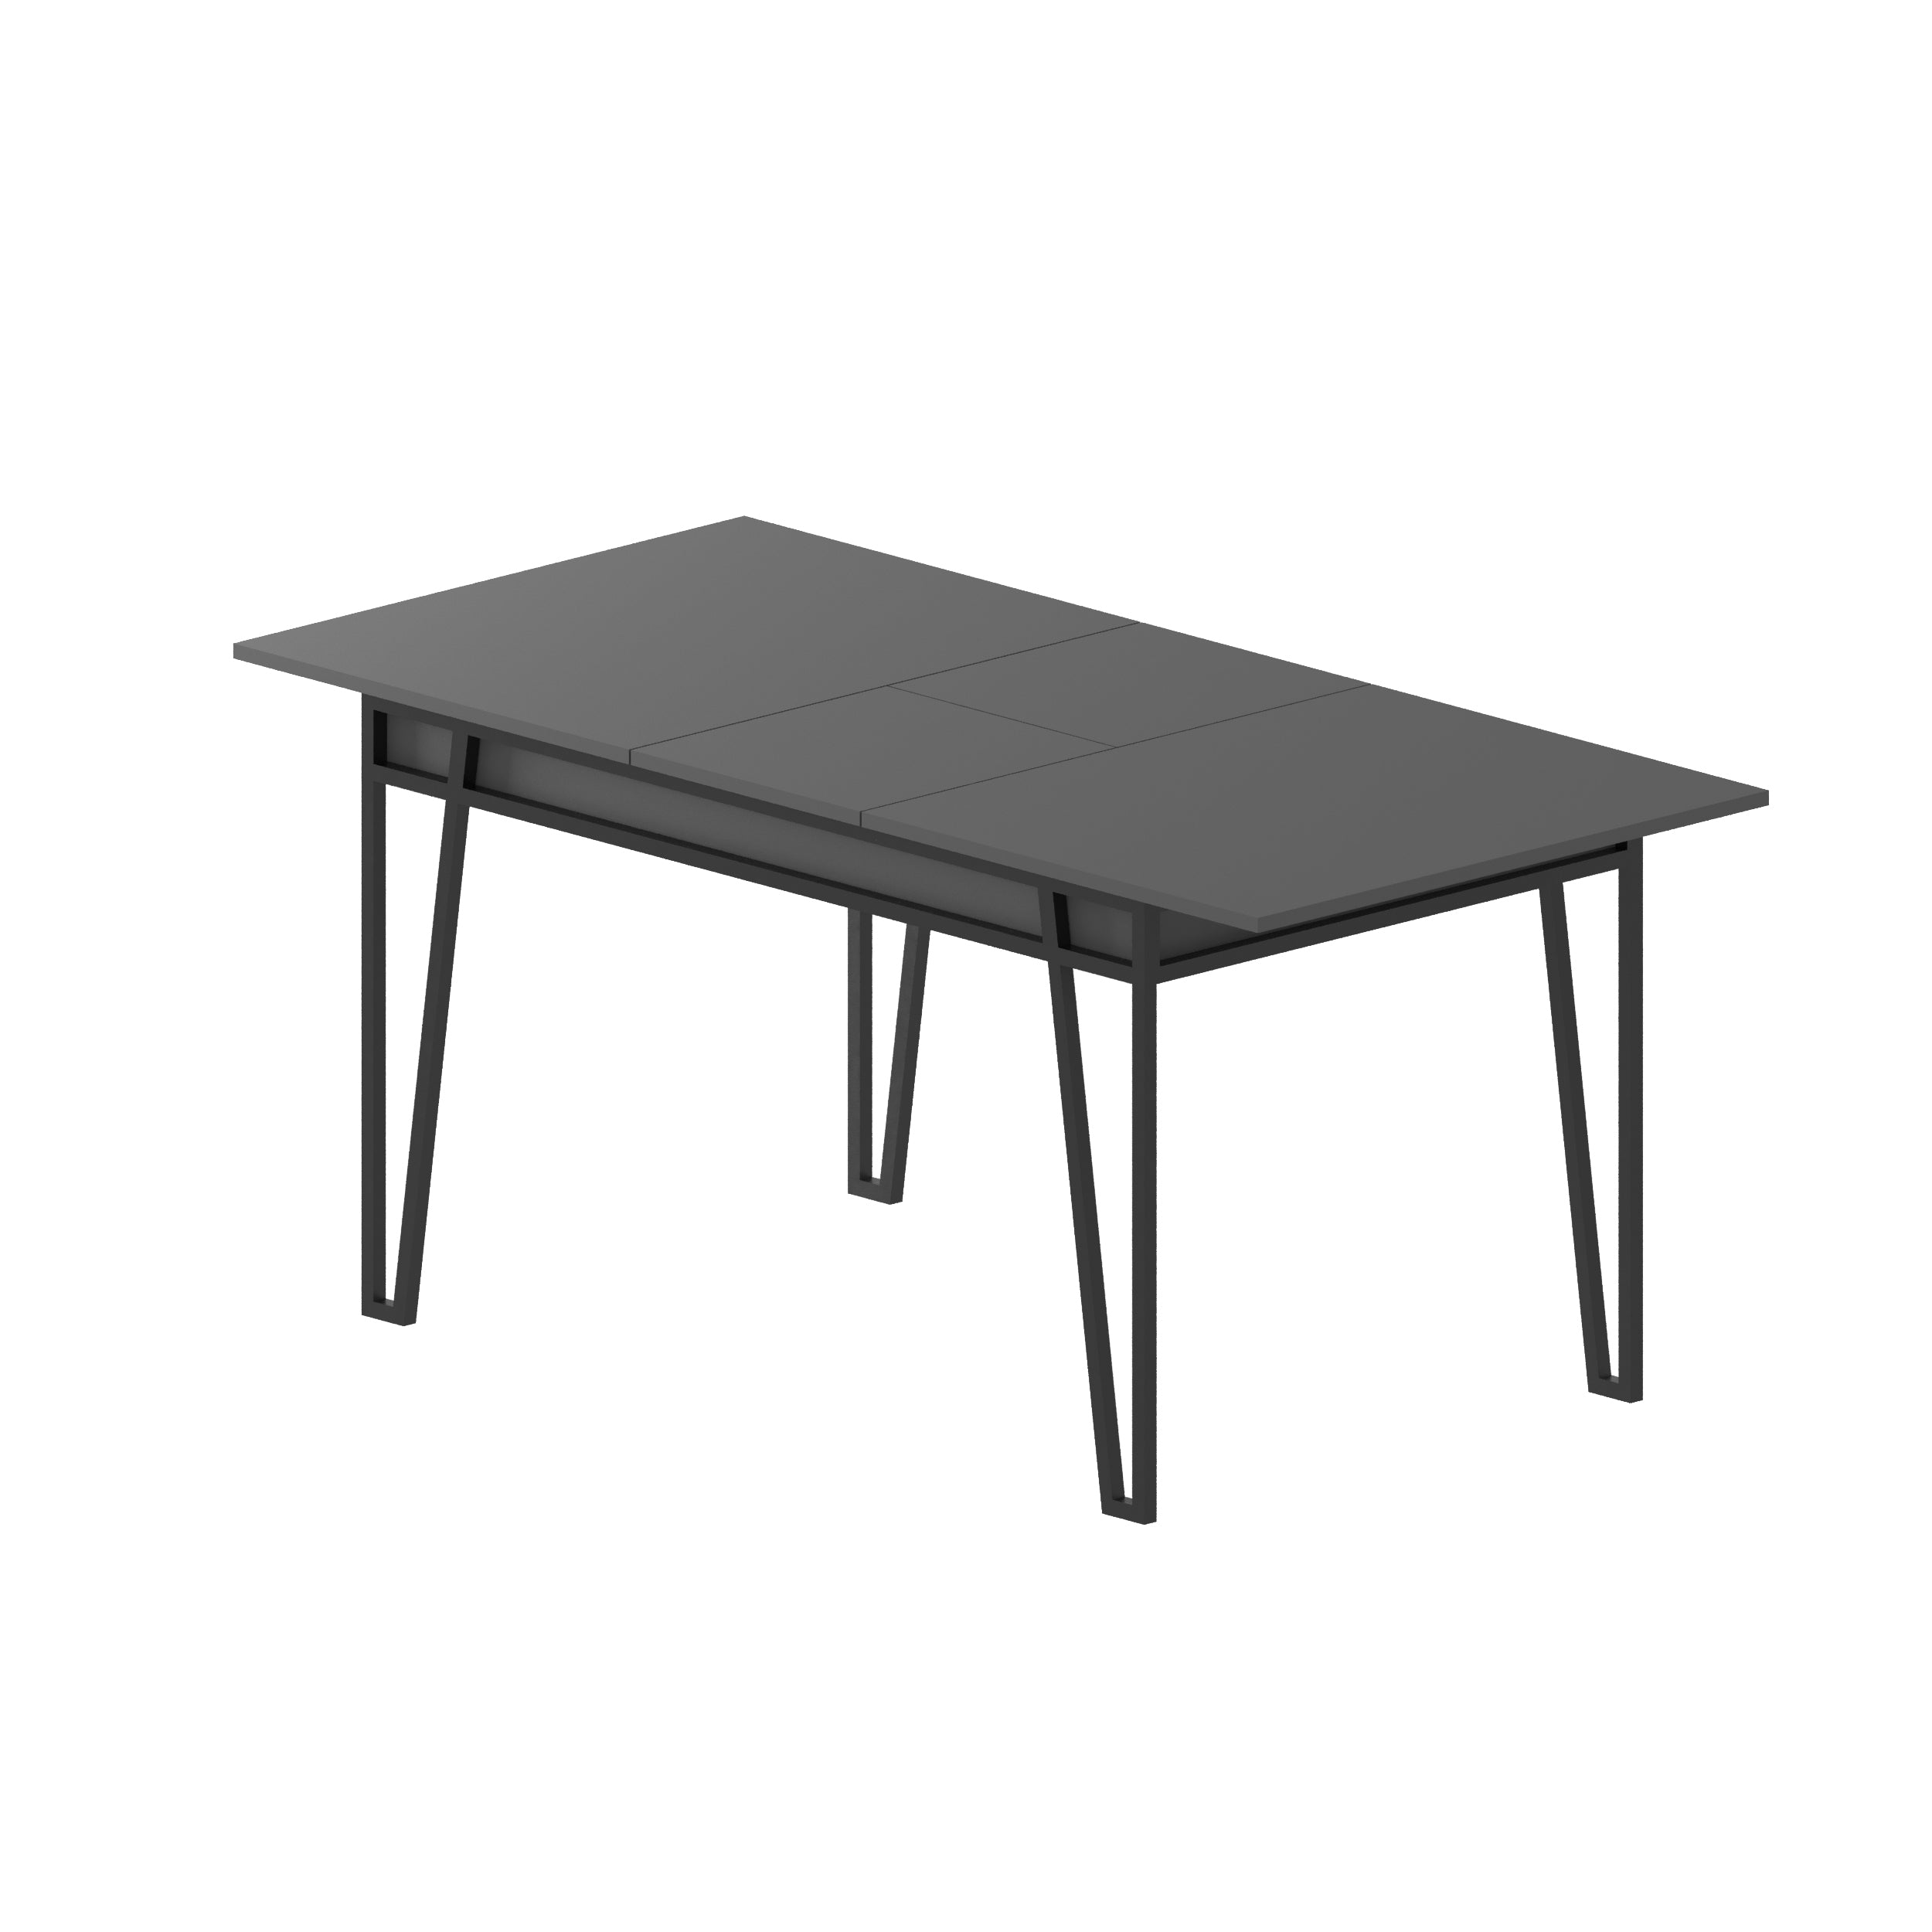 Pal Modern Dining Table Multipurpose Extendable Living Room W 132cm - Decortie